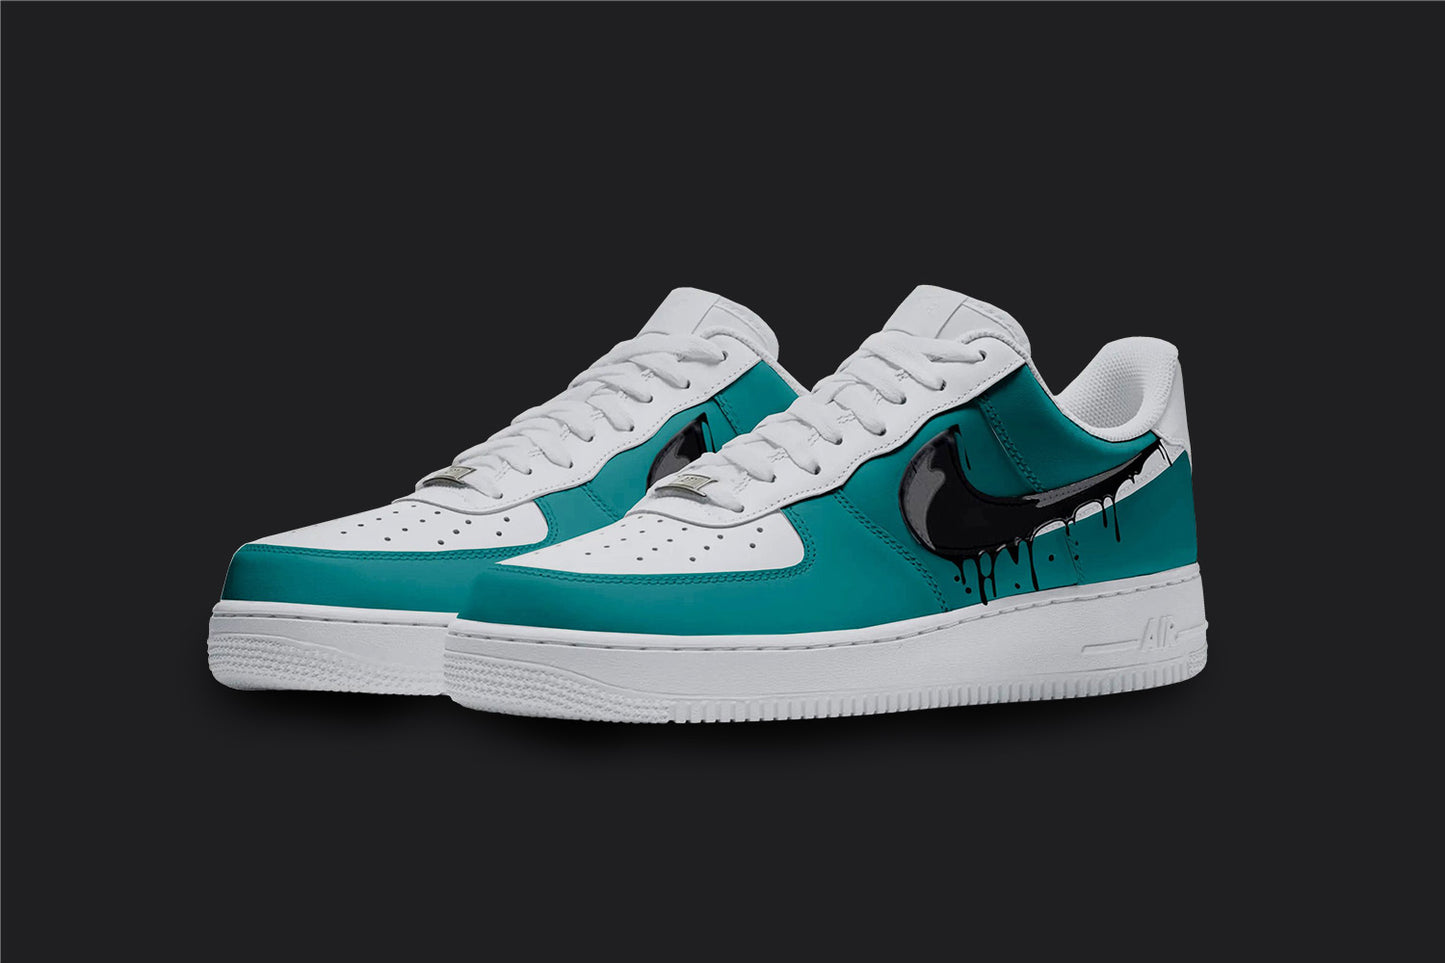 The image is of a Custom Nike Air force 1 sneaker pair on a blank black background. The blue custom sneakers have a black dripping design on the side of the shoes.